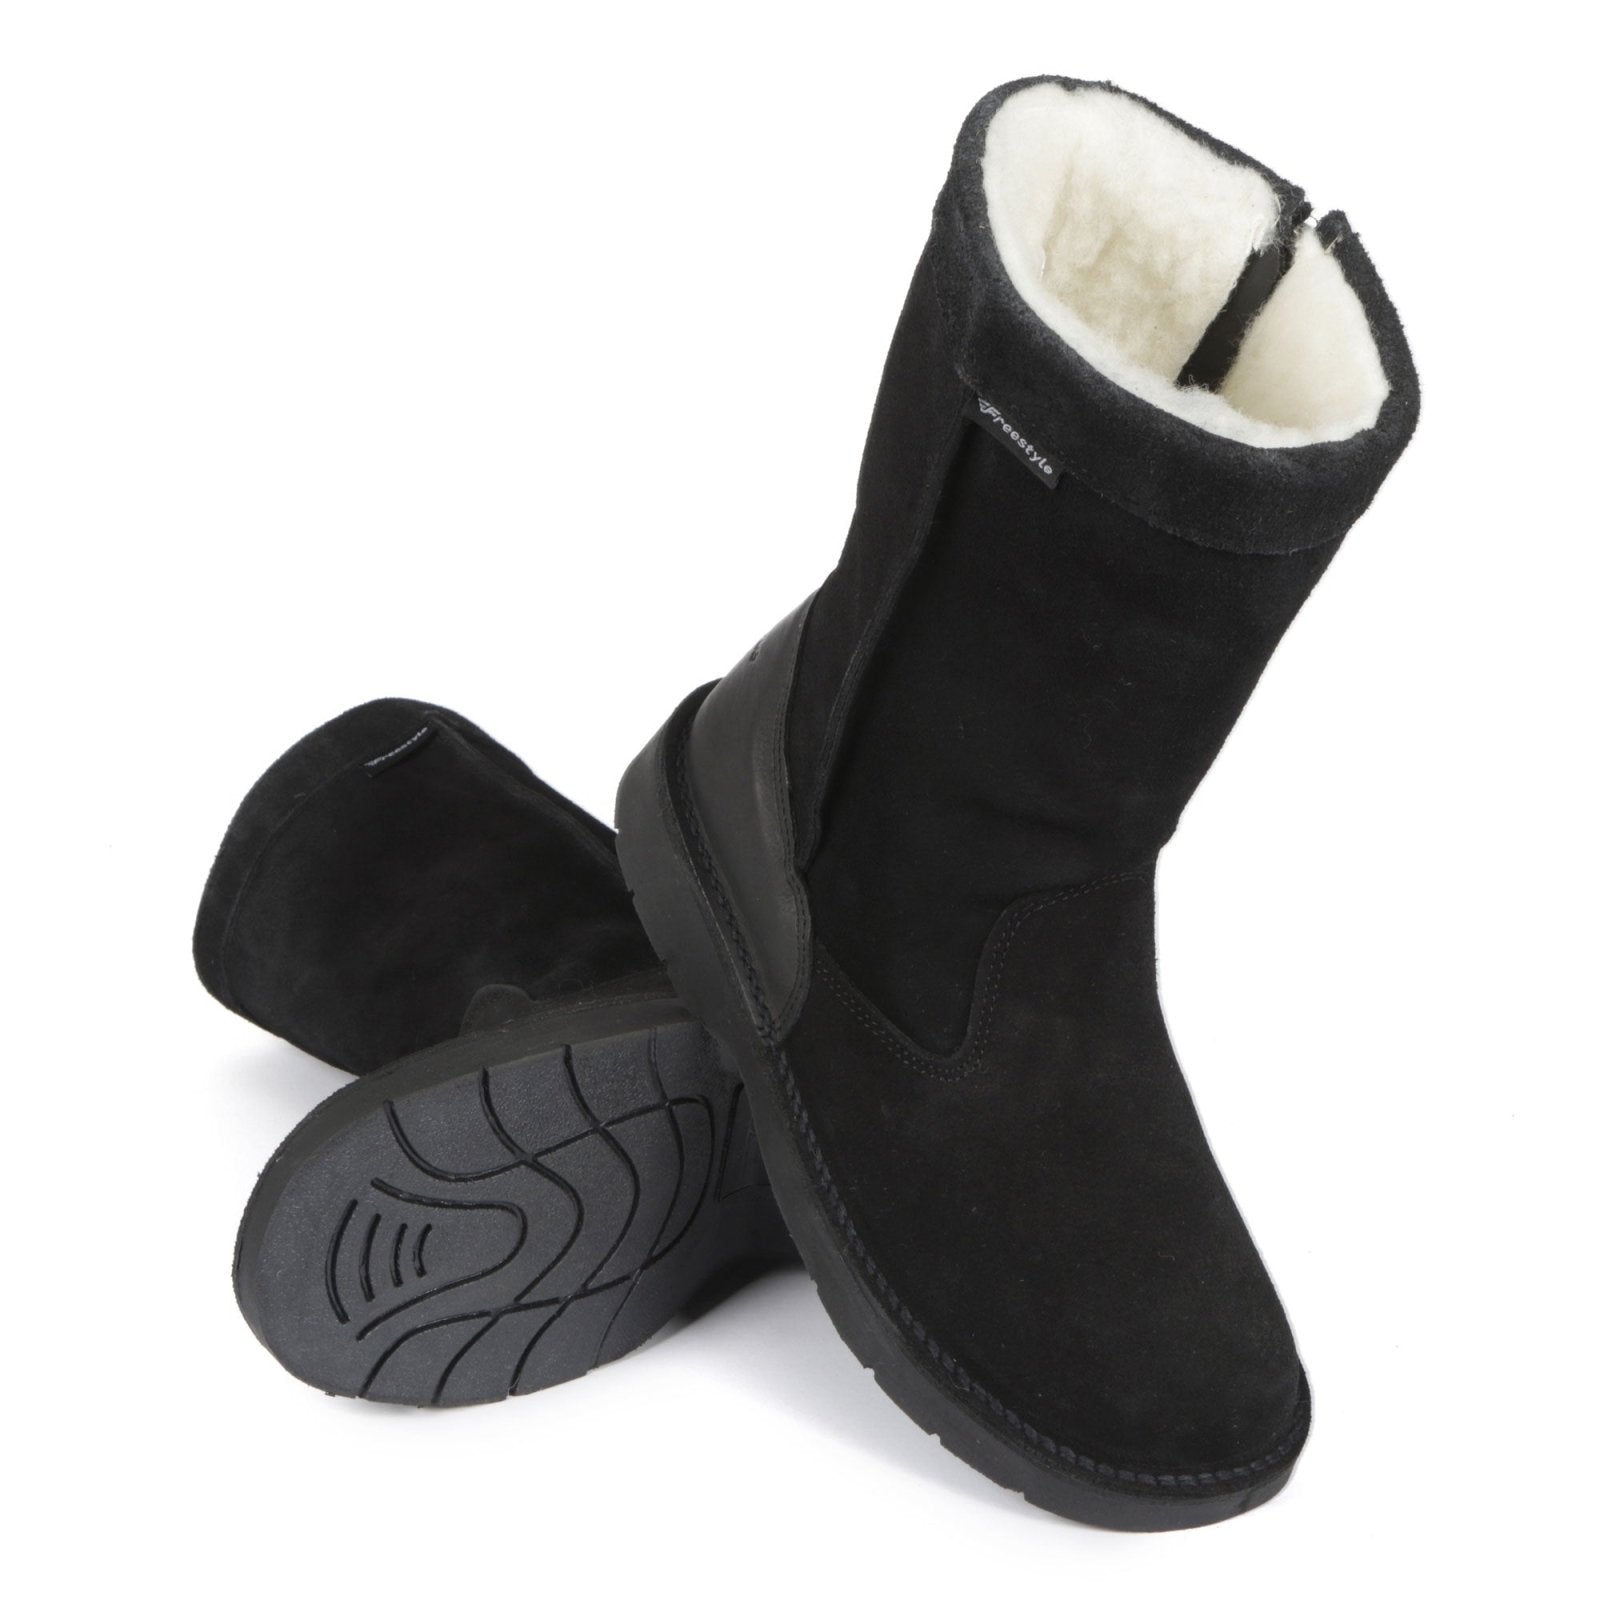 Polar Surf Boot Locally Handmade Premium Suede 100% Wool-lined - Freestyle SA Proudly local leather boots veldskoens vellies leather shoes suede veldskoens